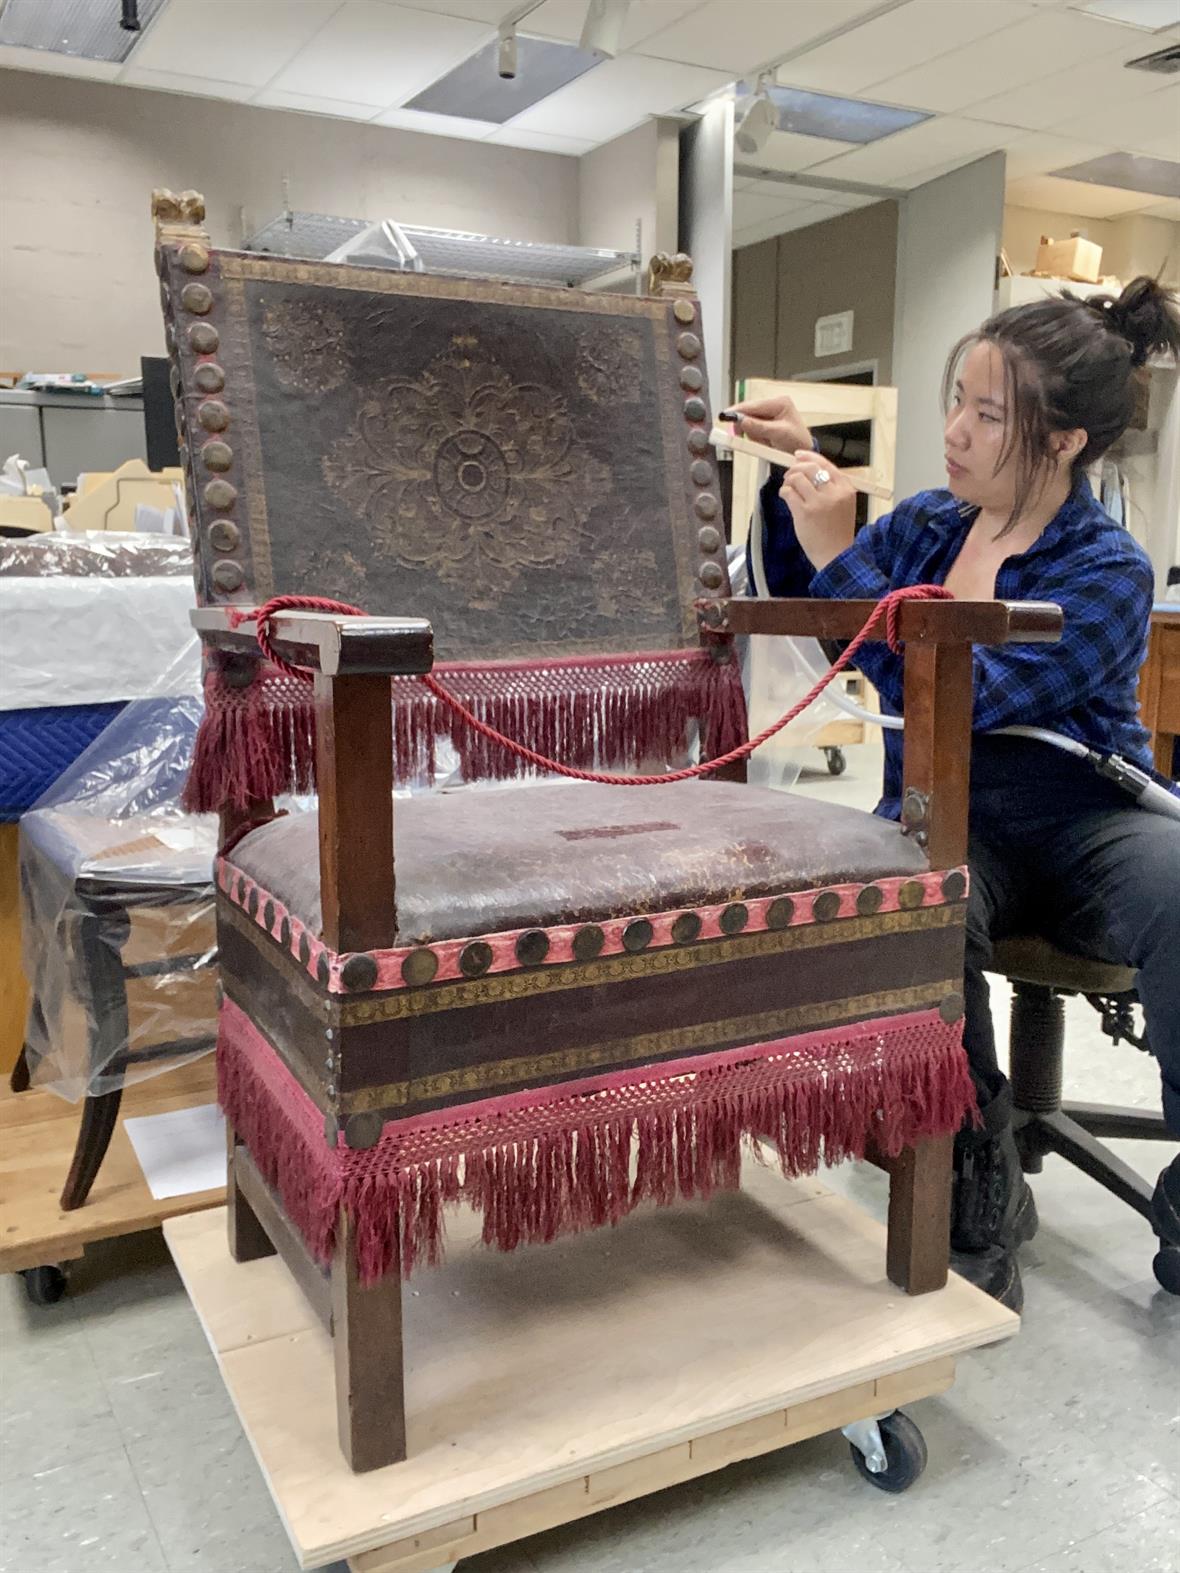 A student uses a soft brush and miniature vacuum to remove dust from the surface of an ornate chair.